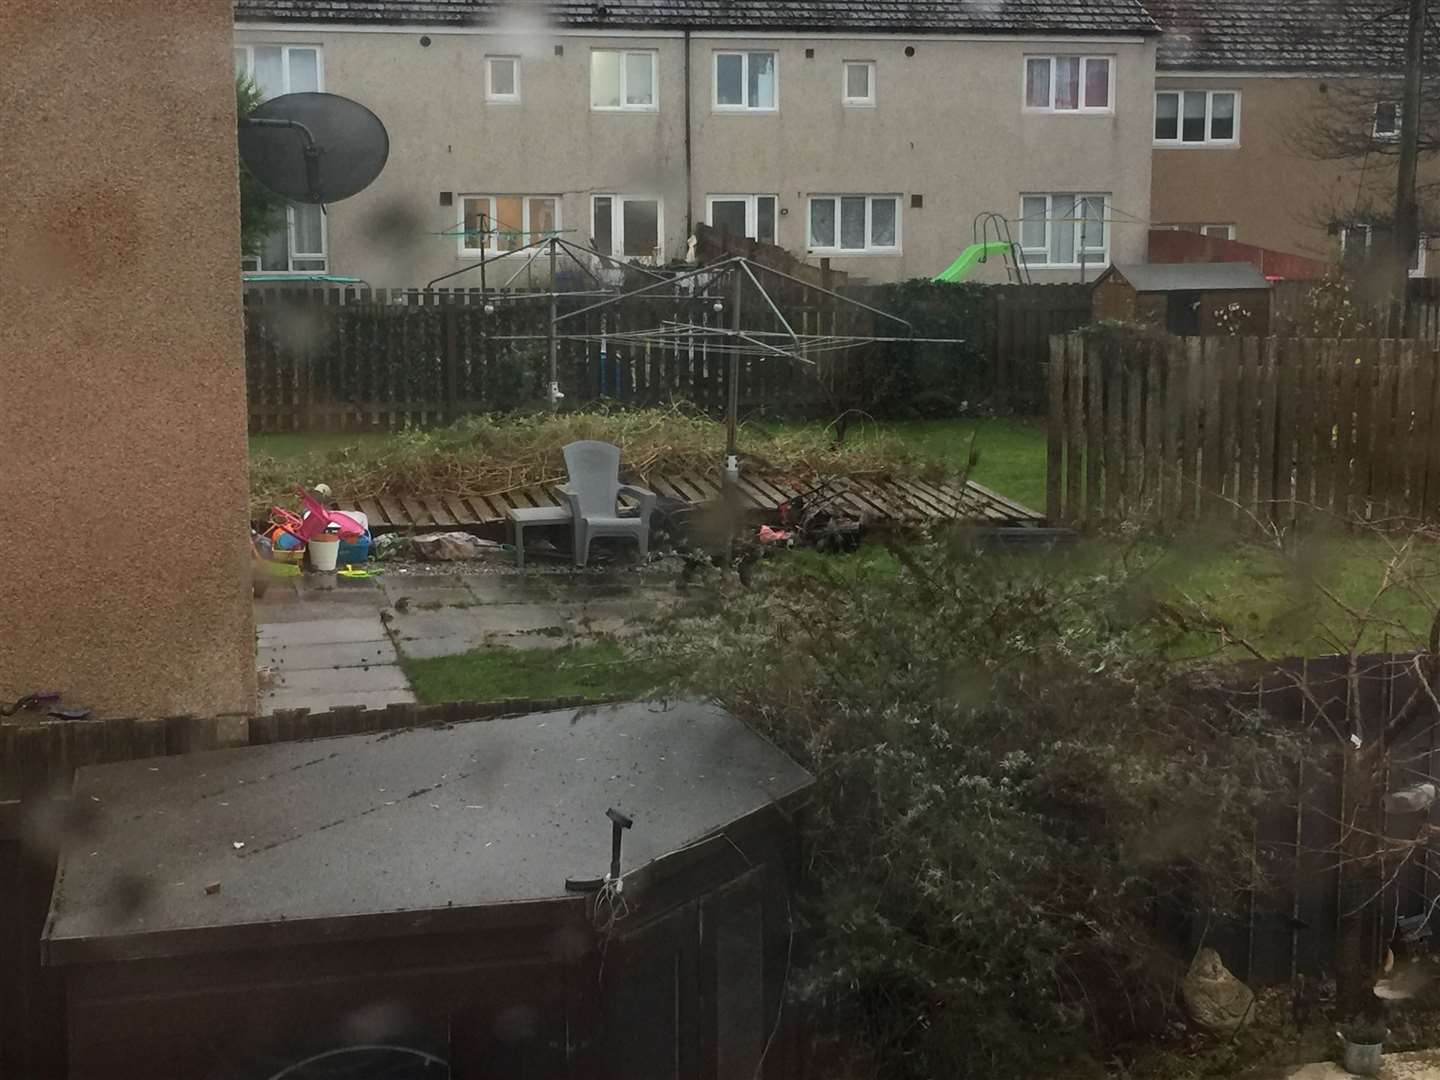 Storm damage photographed by Lossie resident Sara-Jayne Coull.